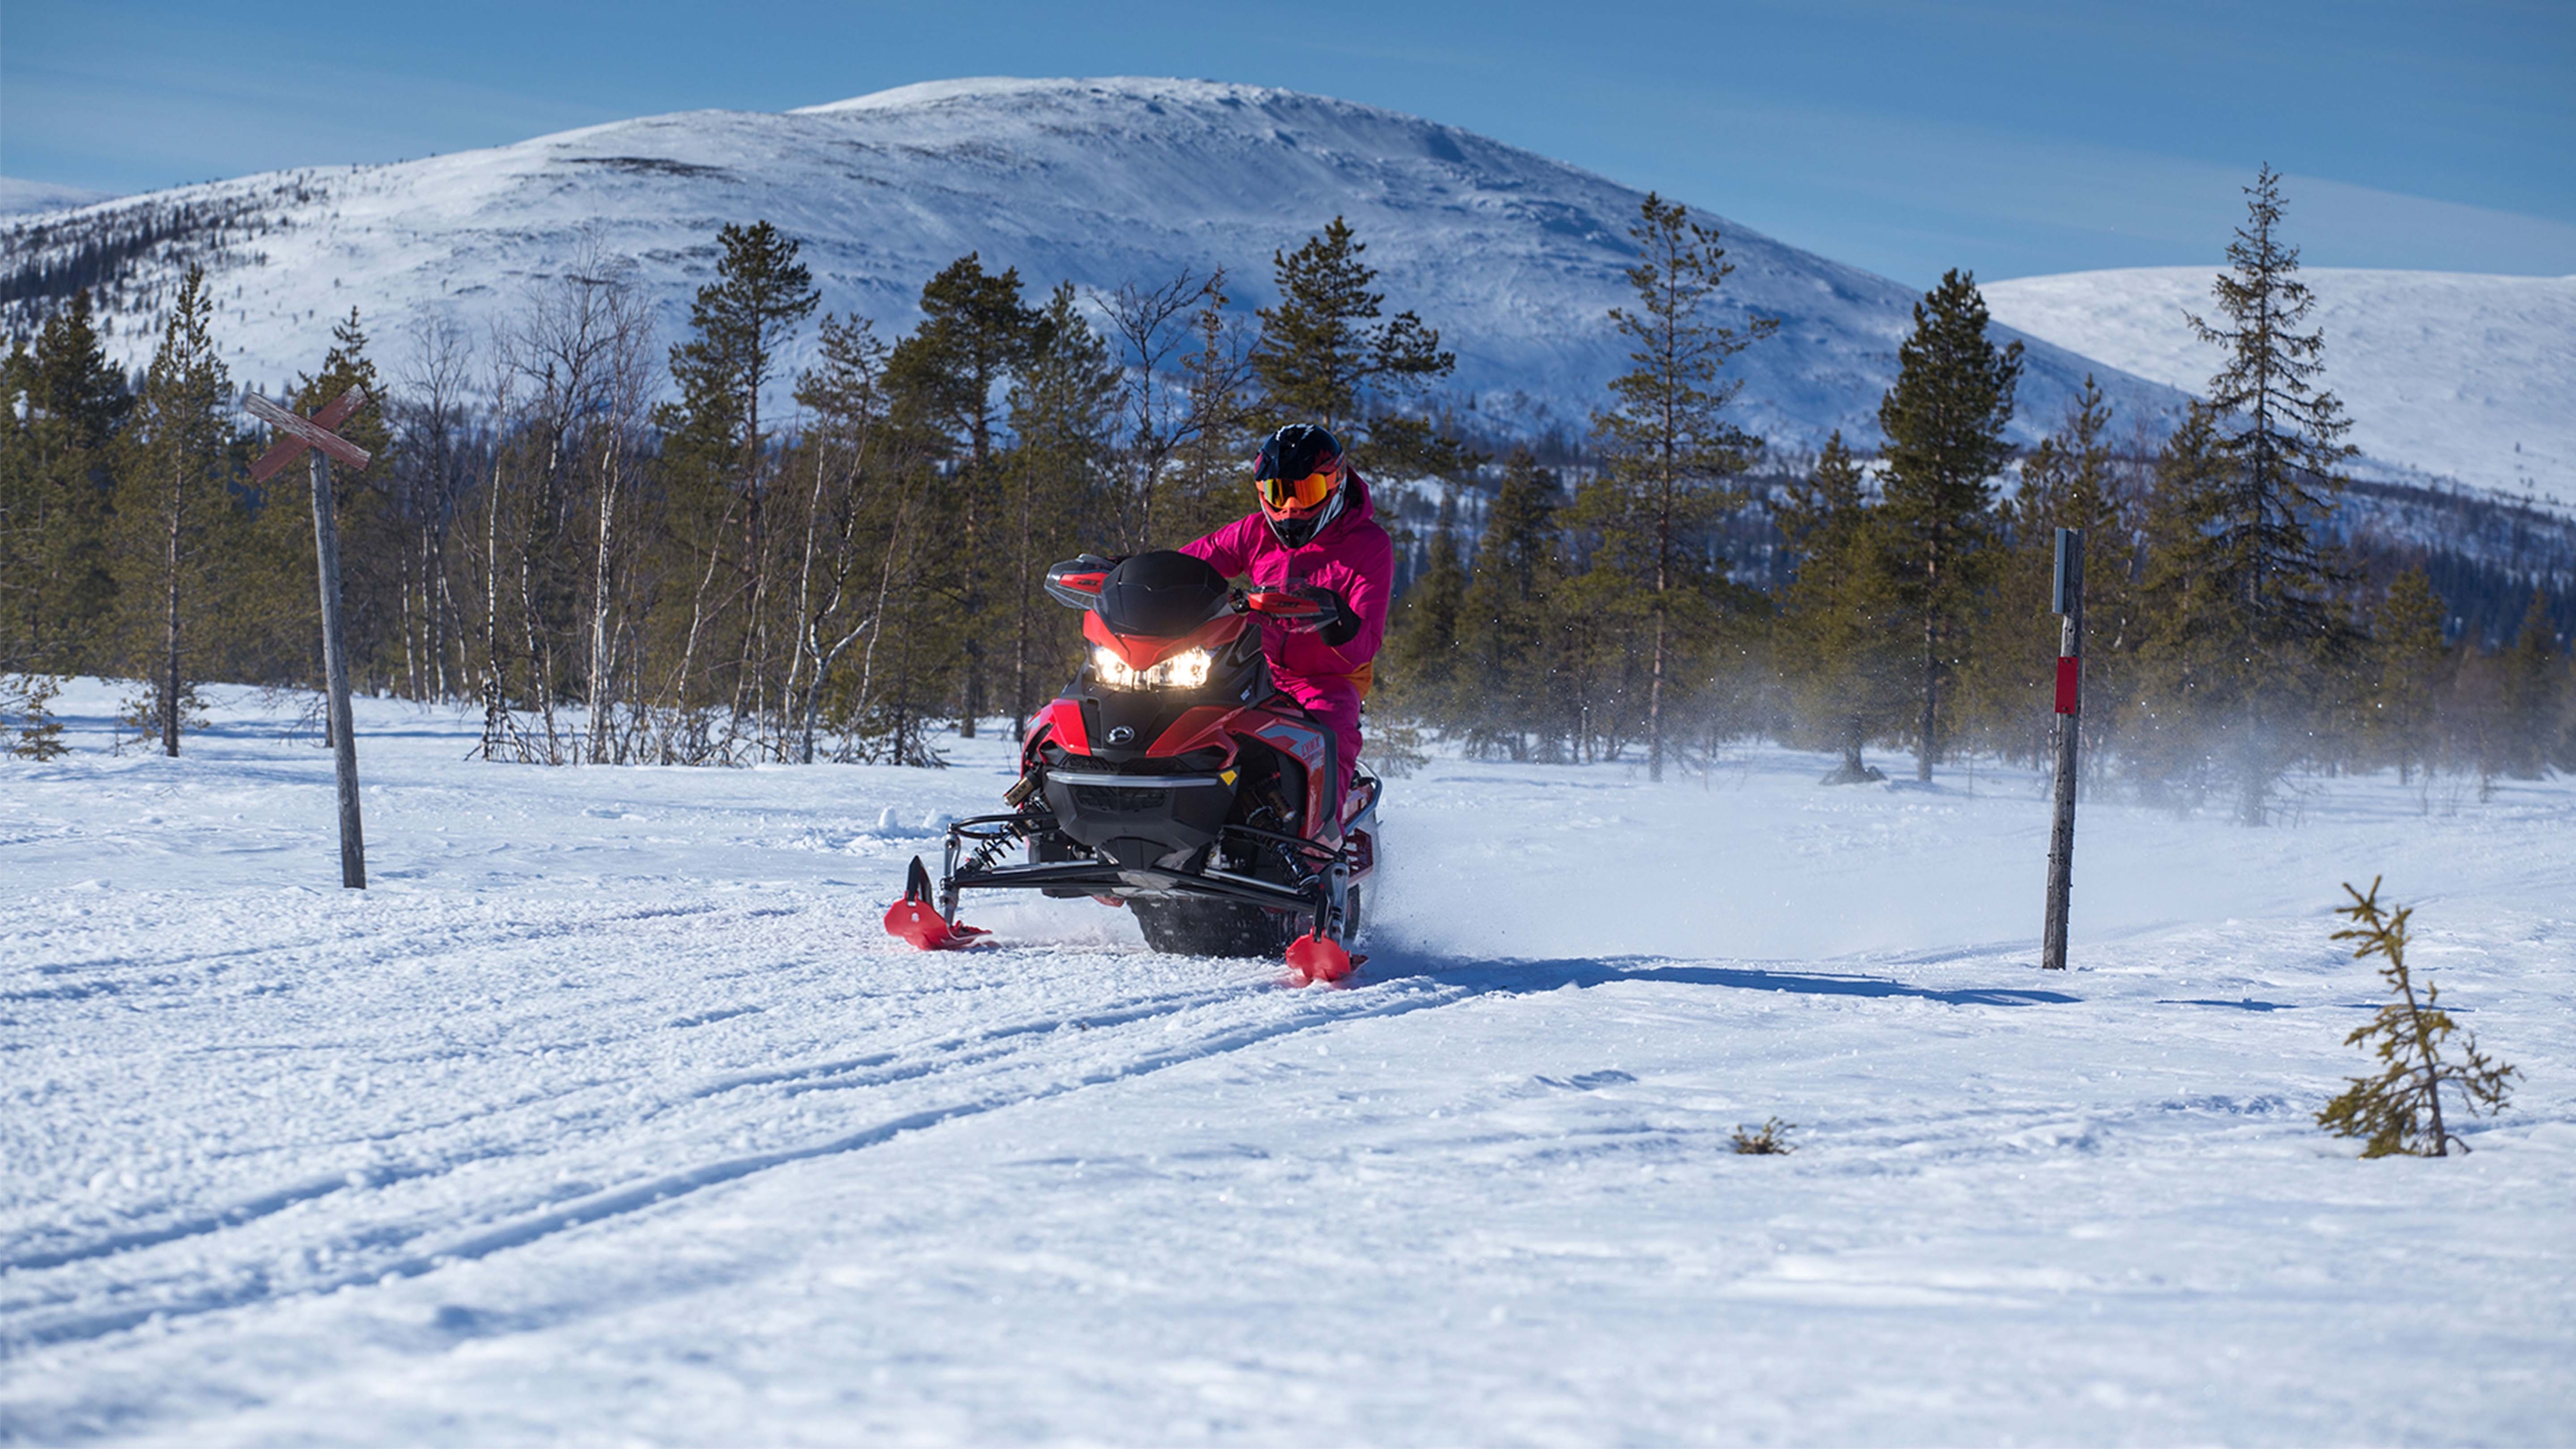 Lynx Rave RE snowmobile riding at mountain scenery in Lapland Finland